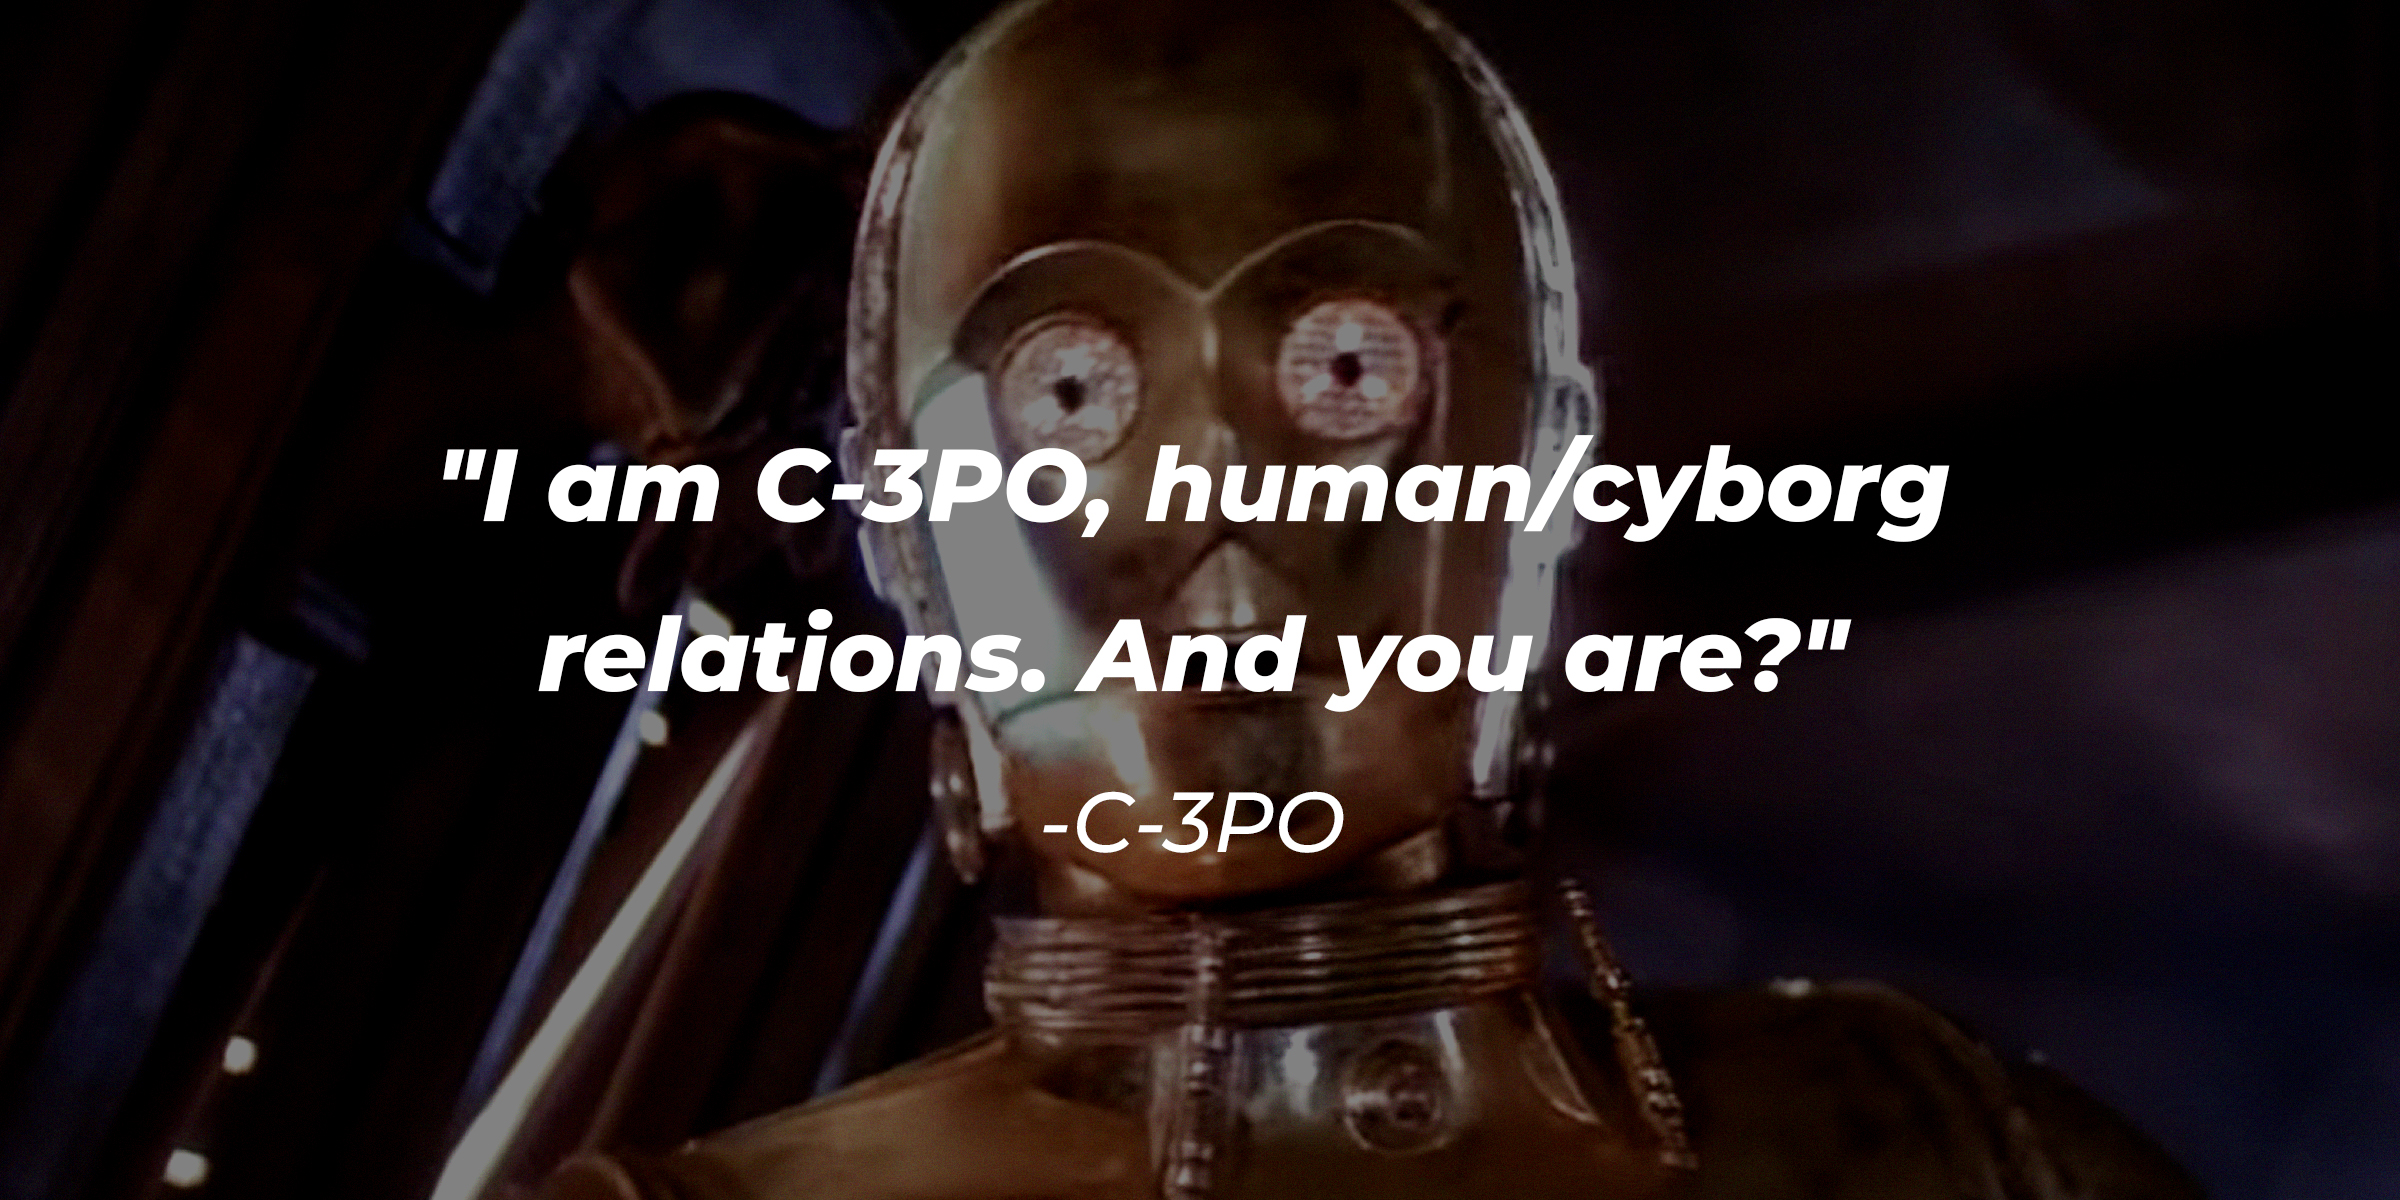 C-3PO's quote, "I am C-3PO, human/cyborg relations. And you are?" | Source: Facebook/StarWars